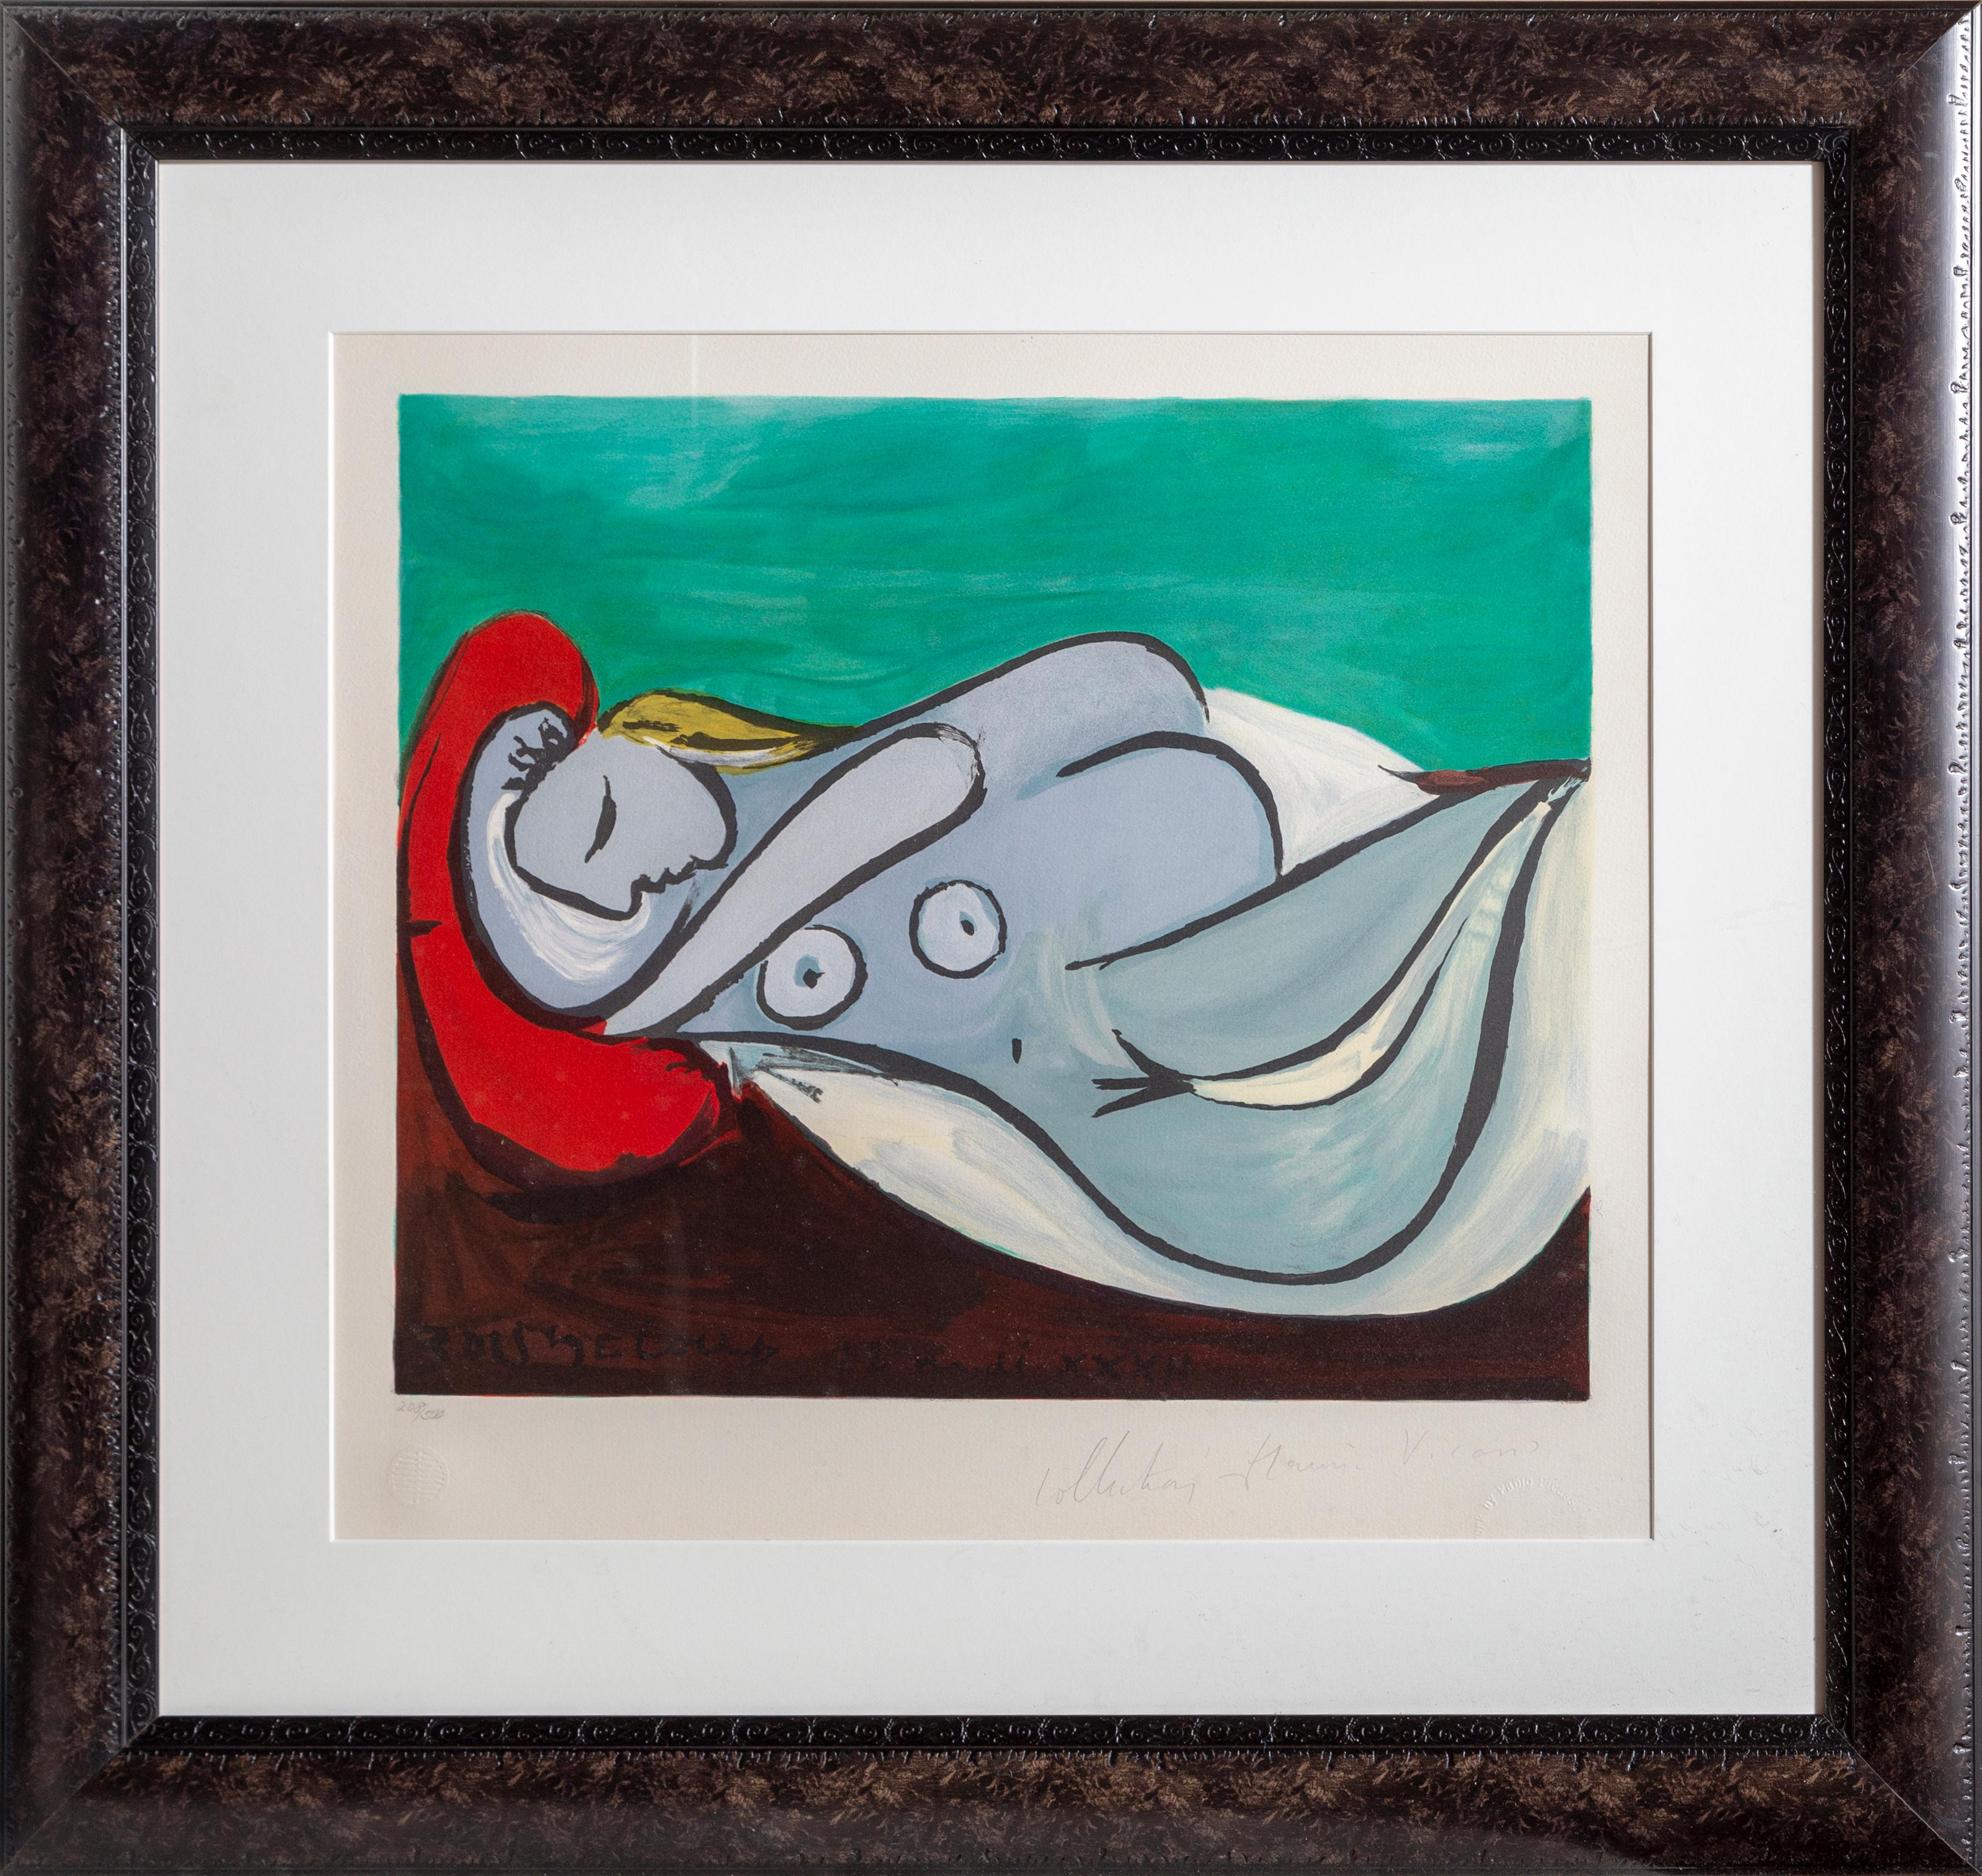 Formeuse a l'Oreiller (Marie-Therese Walter), Cubist Lithograph by Pablo Picasso